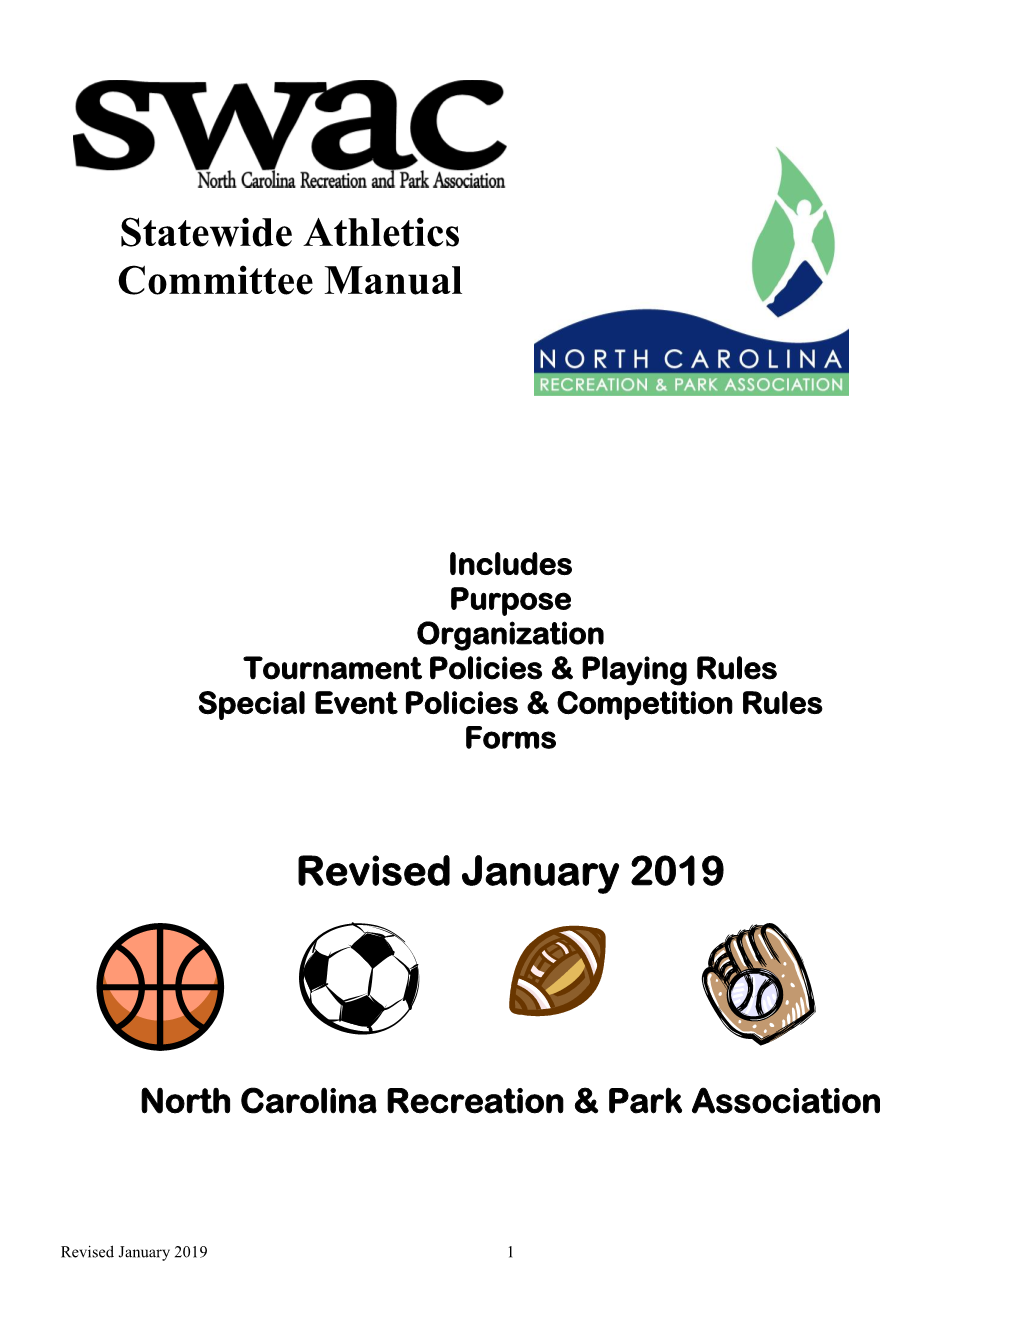 Statewide Athletics Committee Manual